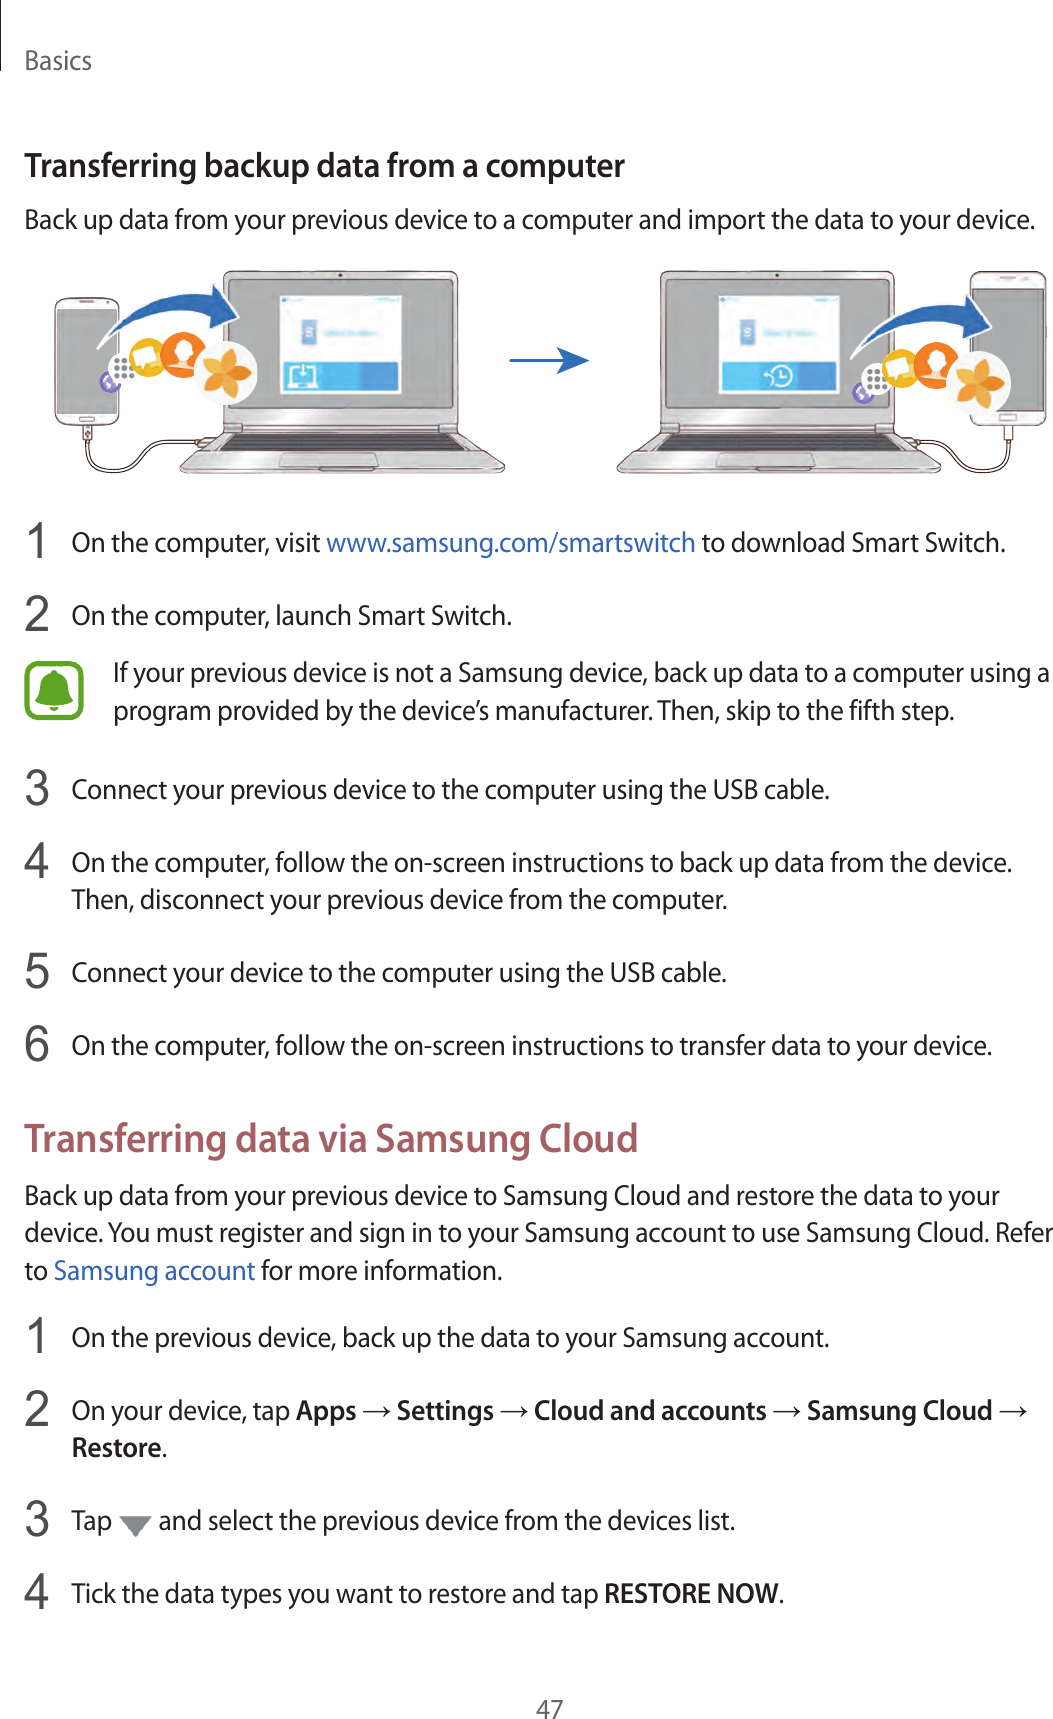 Basics47Transferring backup data from a computerBack up data from your previous device to a computer and import the data to your device.1  On the computer, visit www.samsung.com/smartswitch to download Smart Switch.2  On the computer, launch Smart Switch.If your previous device is not a Samsung device, back up data to a computer using a program provided by the device’s manufacturer. Then, skip to the fifth step.3  Connect your previous device to the computer using the USB cable.4  On the computer, follow the on-screen instructions to back up data from the device. Then, disconnect your previous device from the computer.5  Connect your device to the computer using the USB cable.6  On the computer, follow the on-screen instructions to transfer data to your device.Transferring data via Samsung CloudBack up data from your previous device to Samsung Cloud and restore the data to your device. You must register and sign in to your Samsung account to use Samsung Cloud. Refer to Samsung account for more information.1  On the previous device, back up the data to your Samsung account.2  On your device, tap Apps → Settings → Cloud and accounts → Samsung Cloud → Restore.3  Tap   and select the previous device from the devices list.4  Tick the data types you want to restore and tap RESTORE NOW.